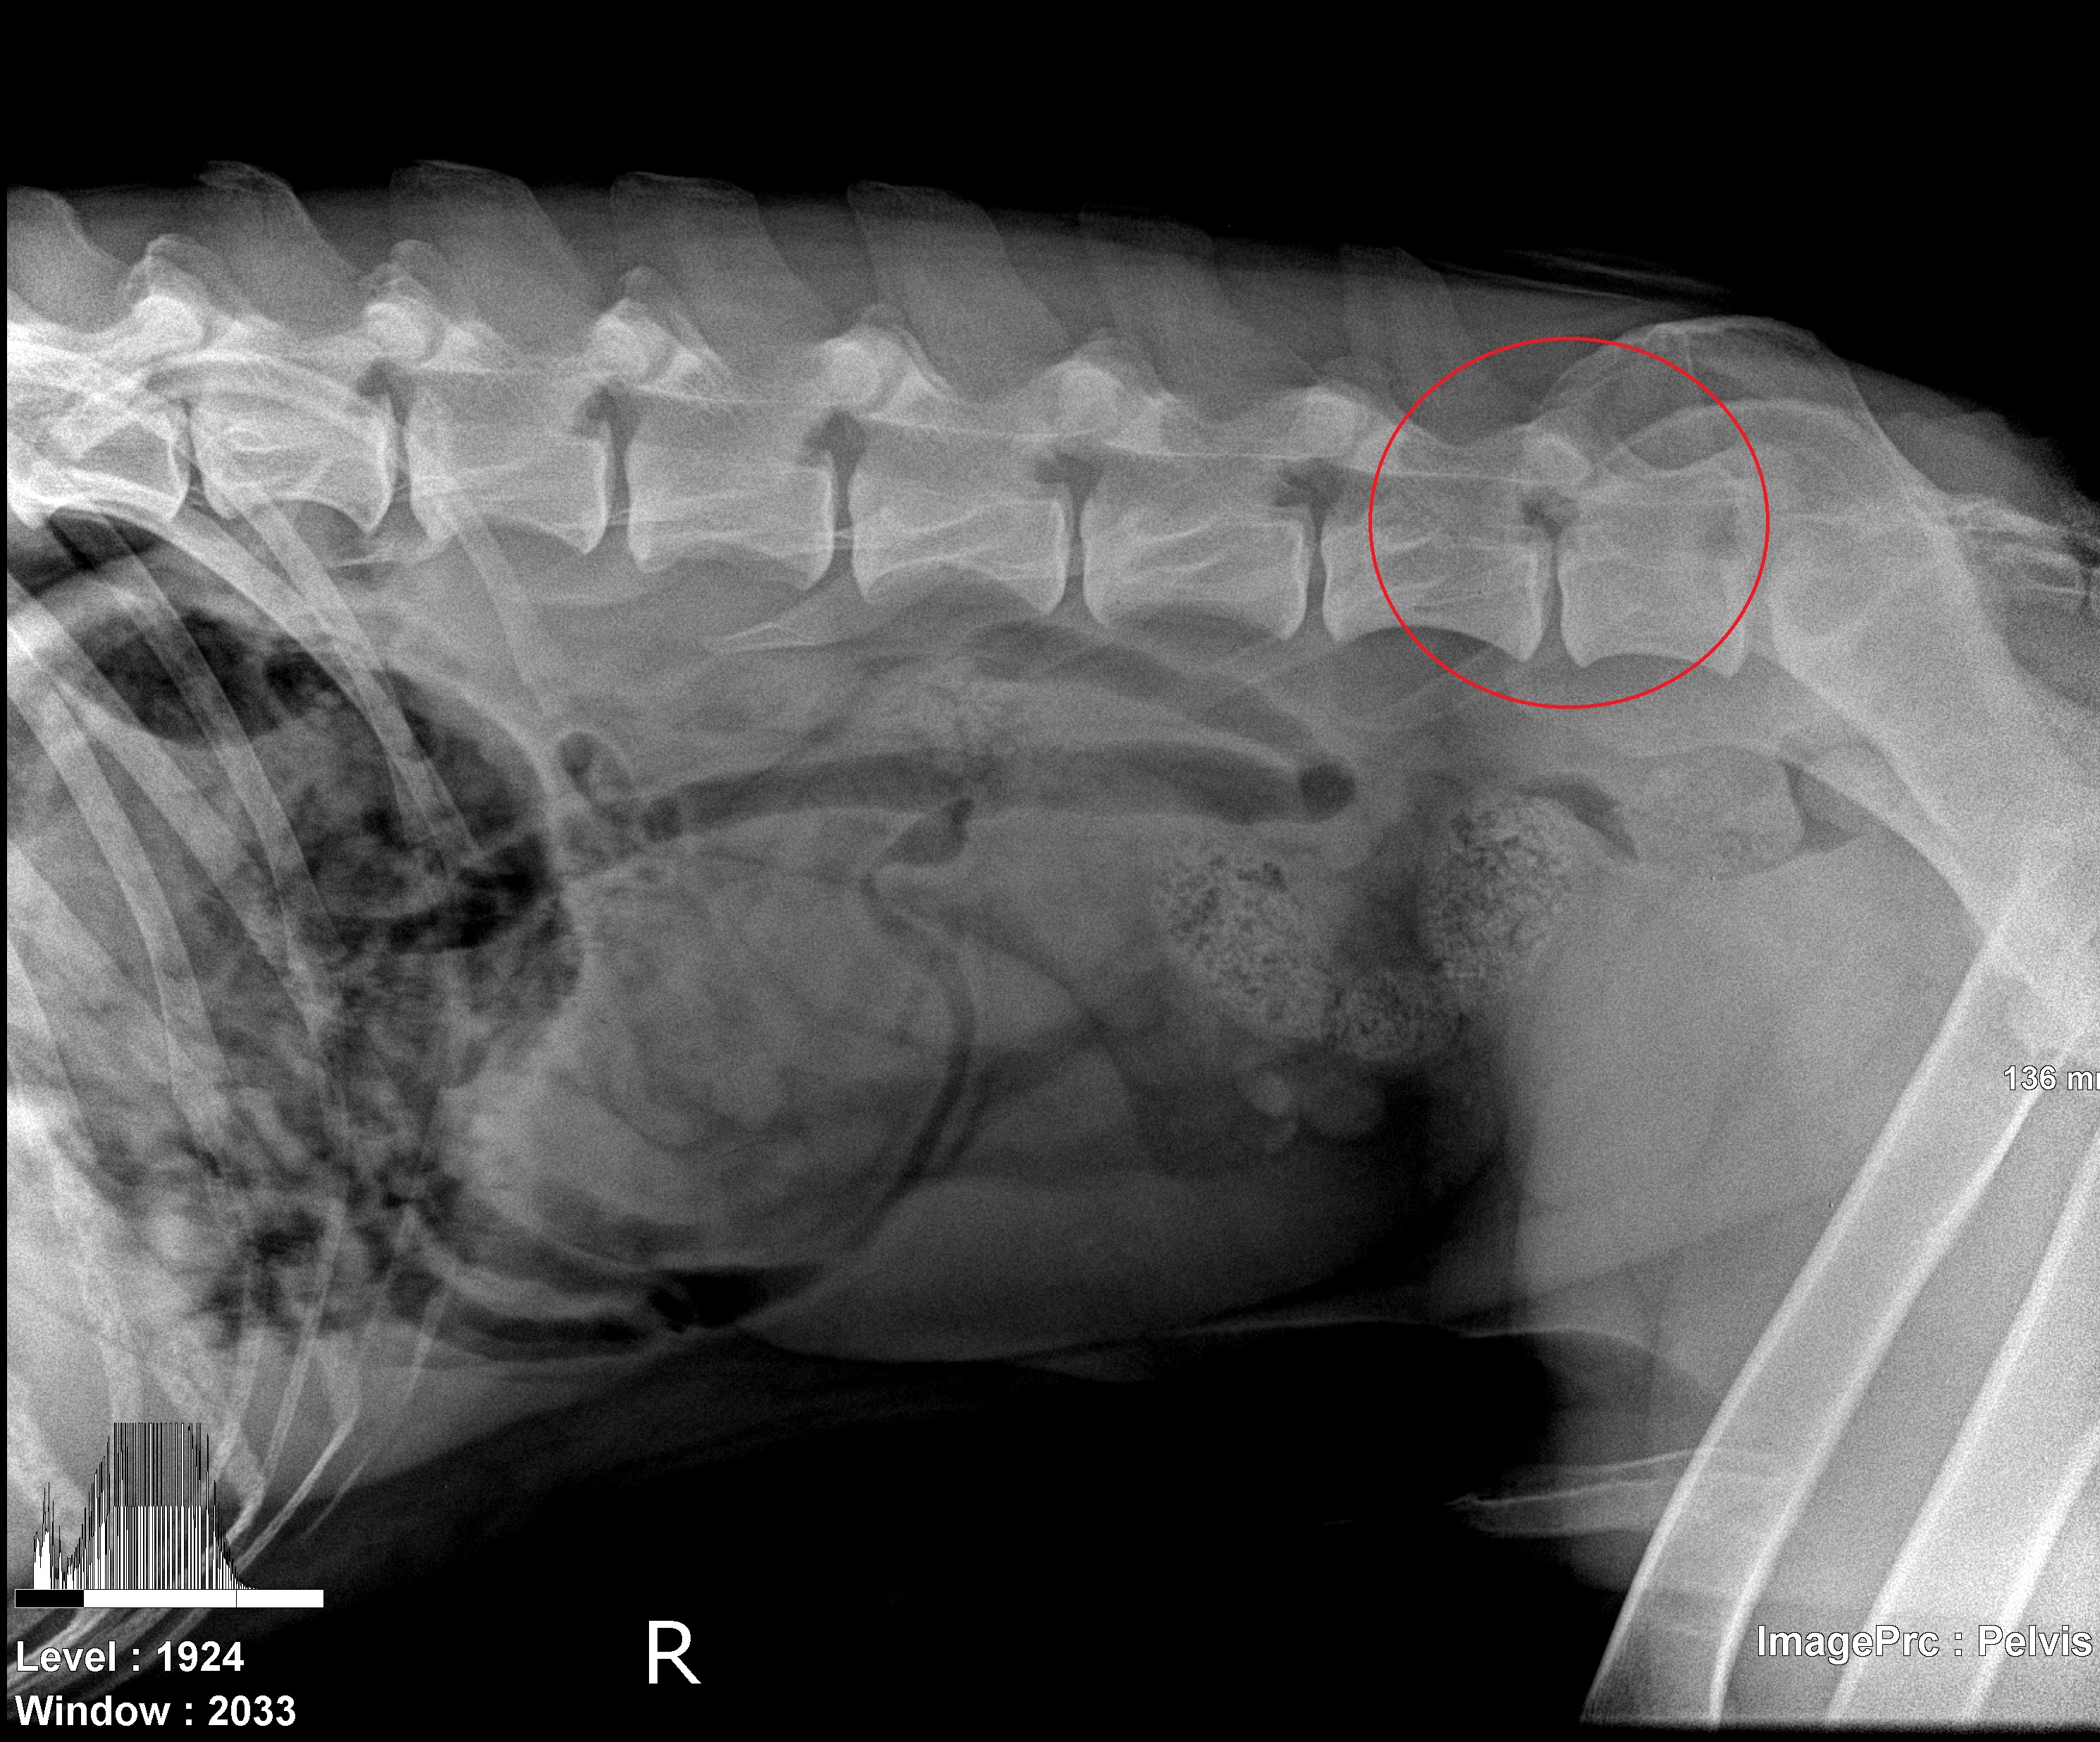 cauda equina syndrome in dogs